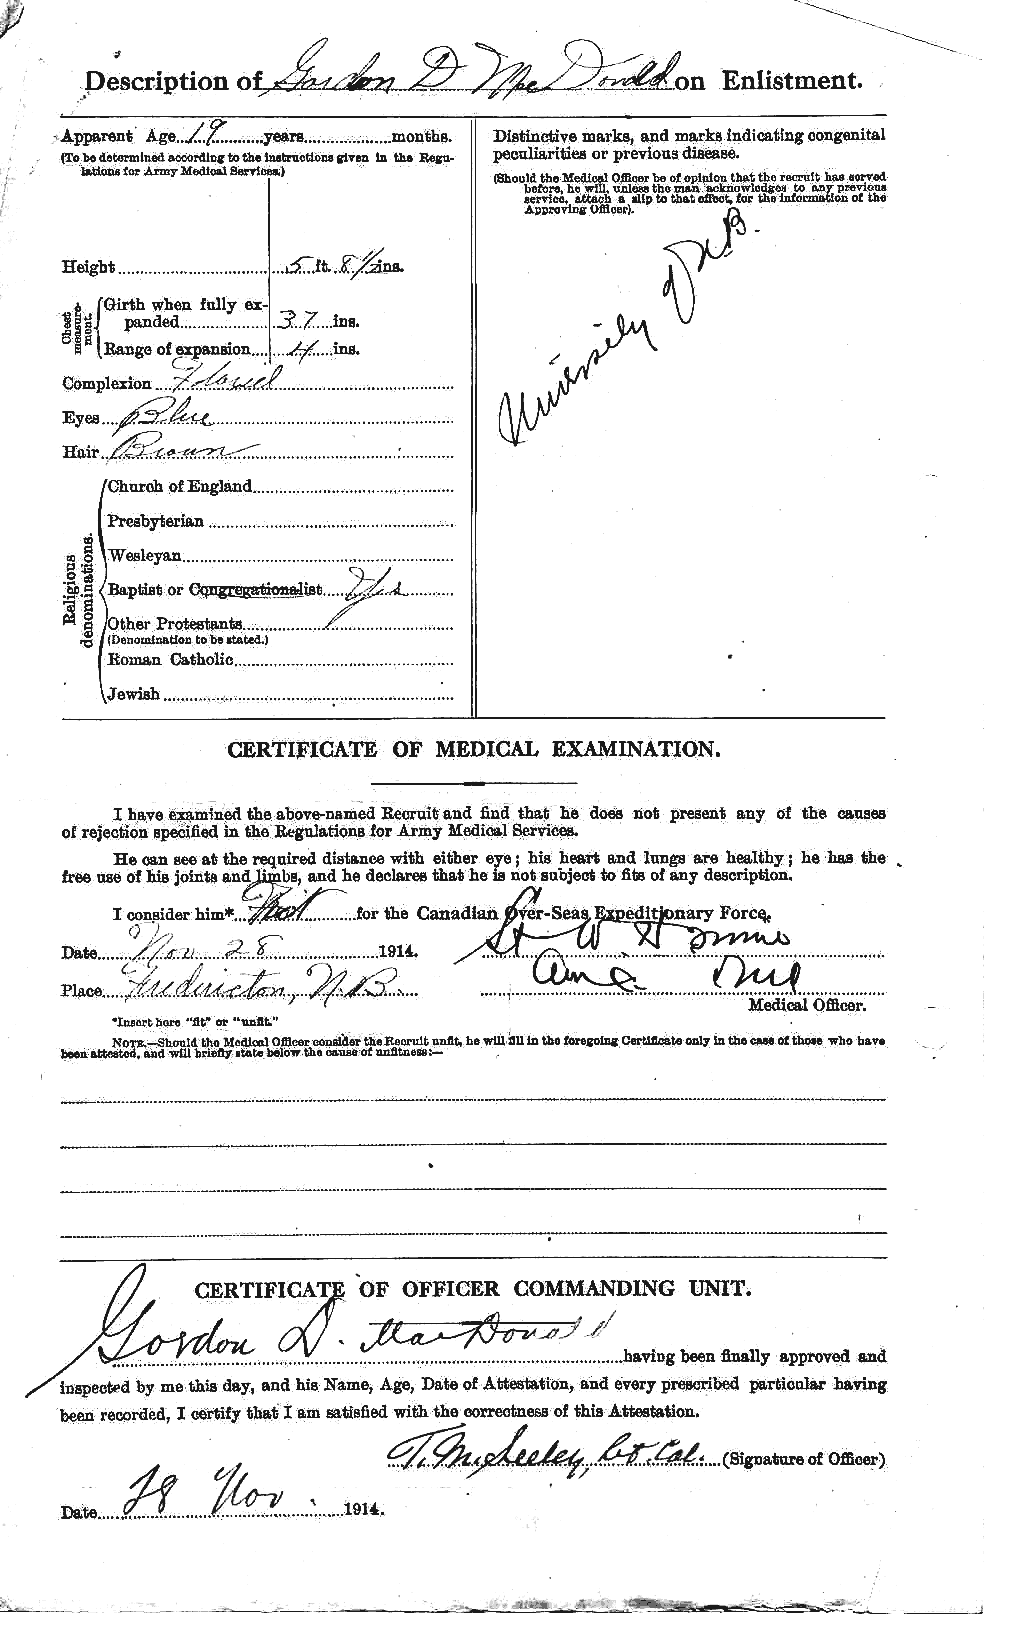 Personnel Records of the First World War - CEF 518903b